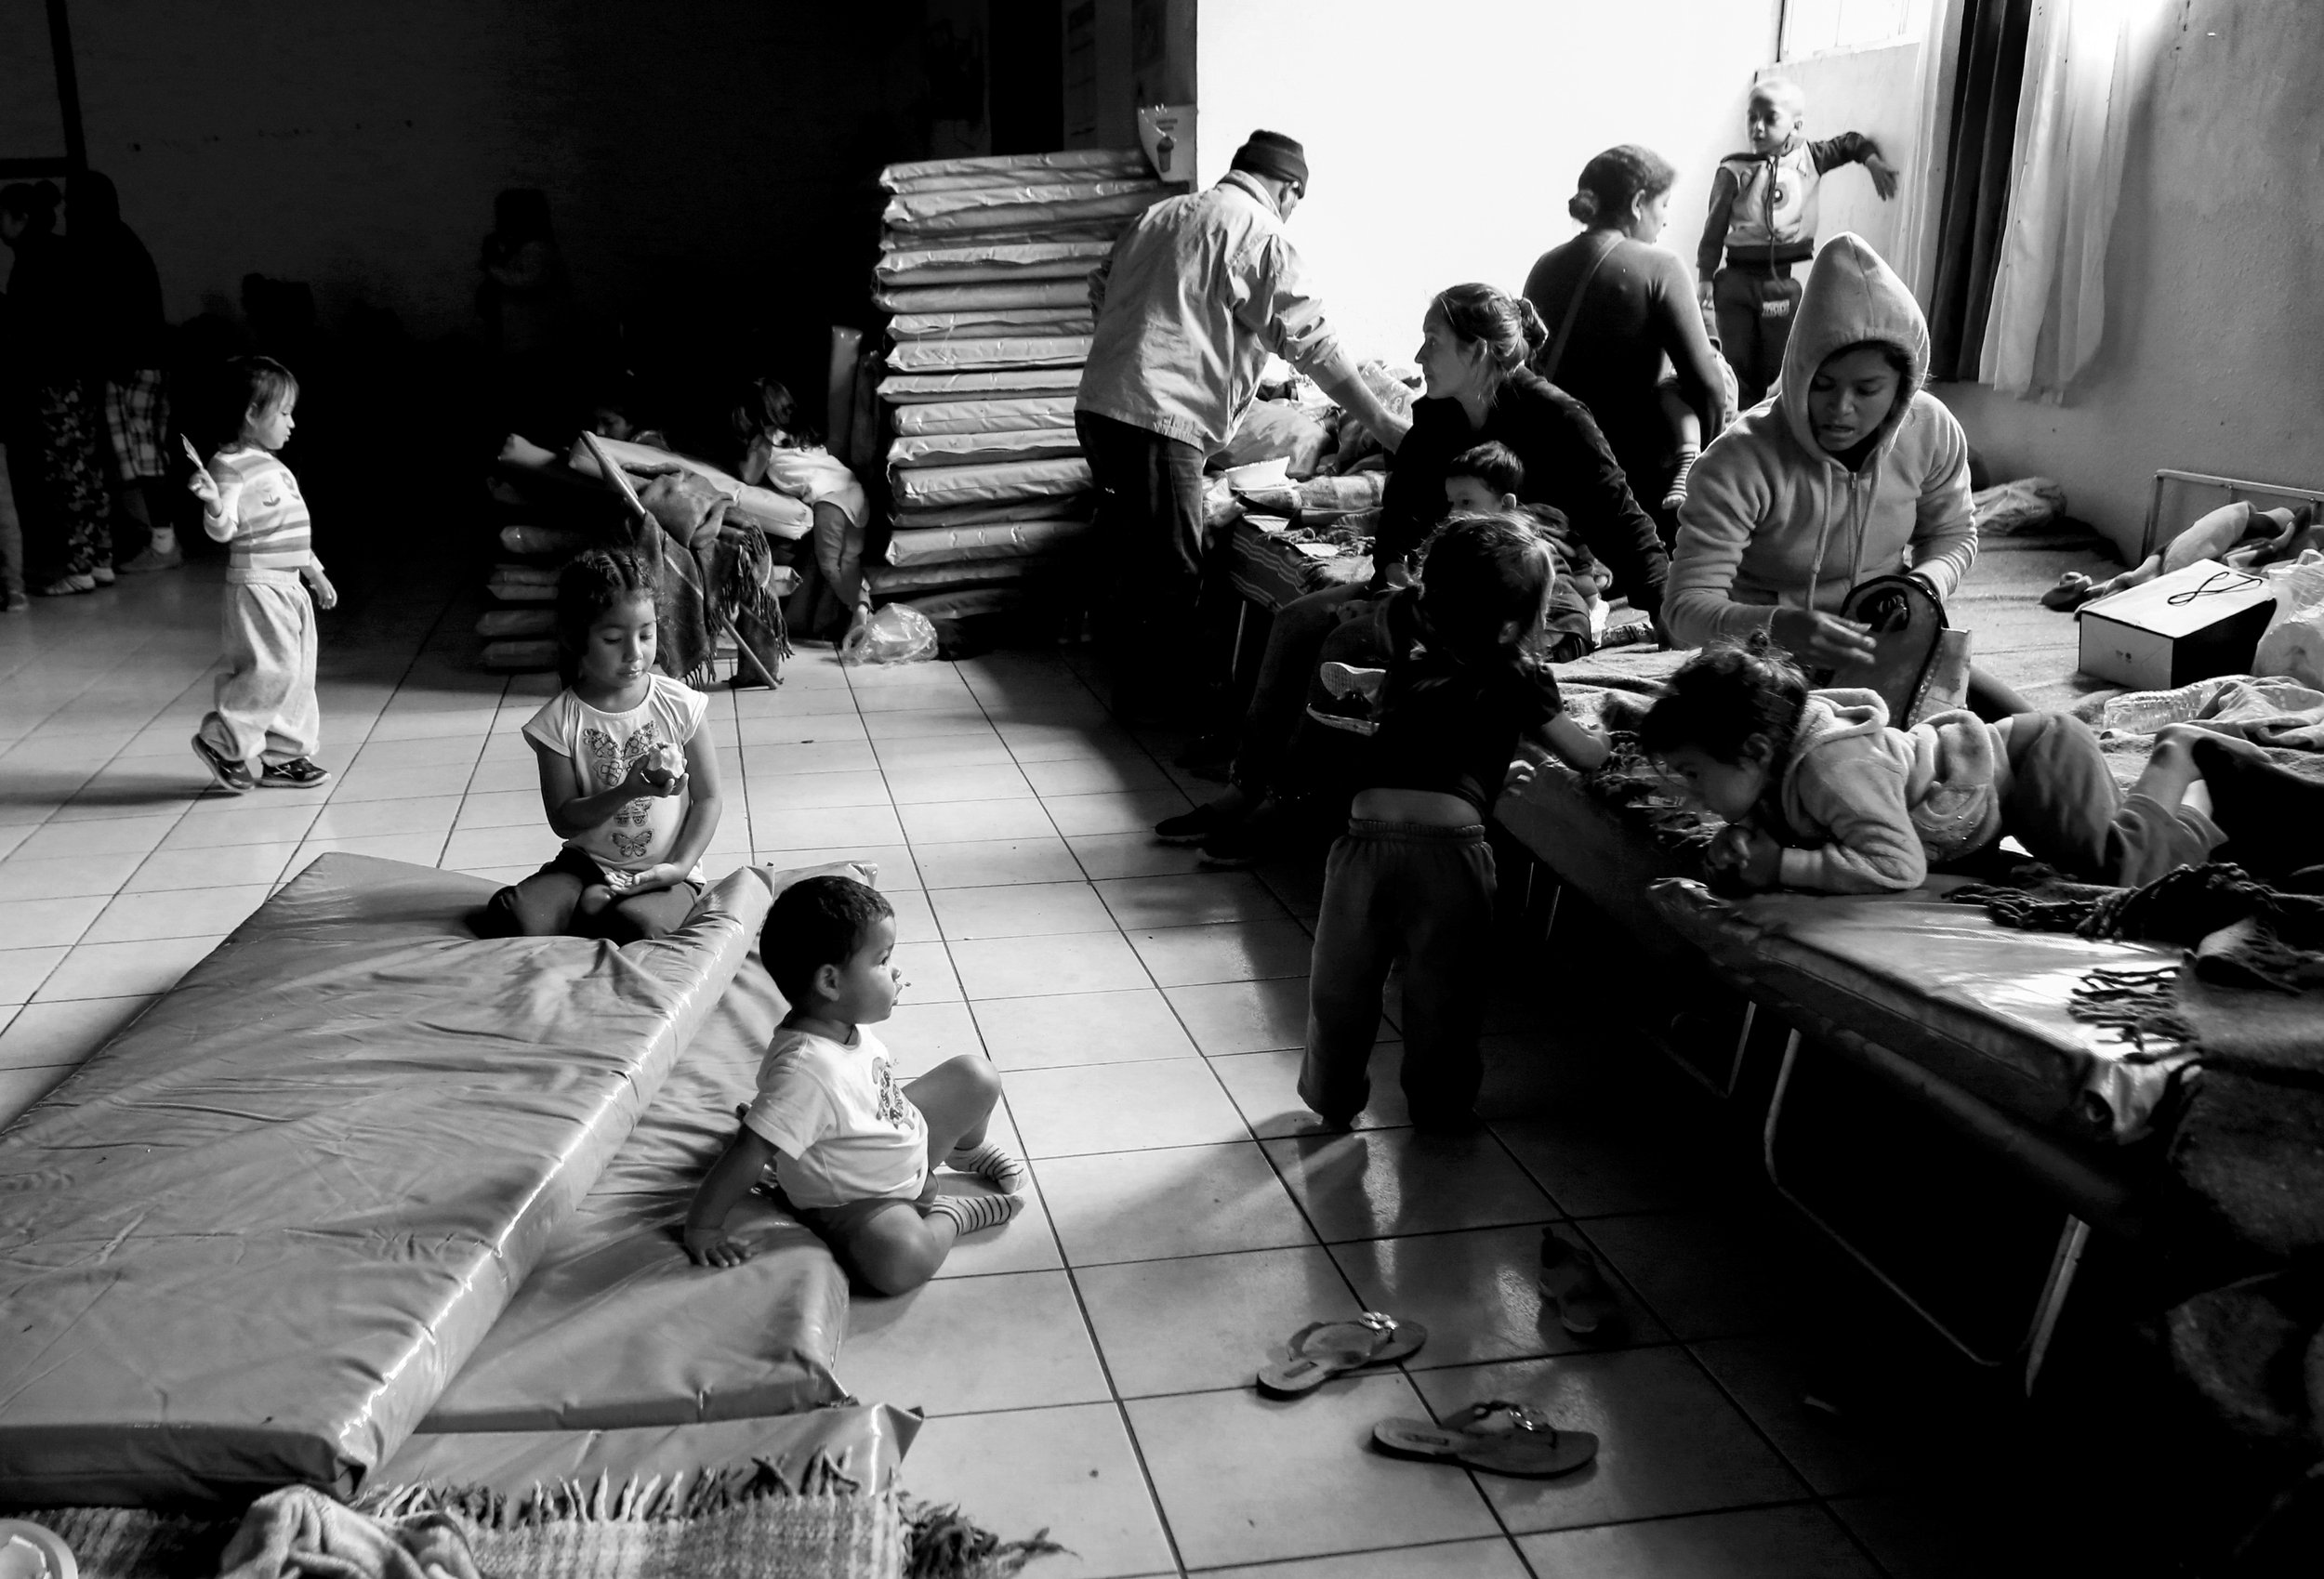  Children play on mattresses and cots in the main room of my the shelter. 